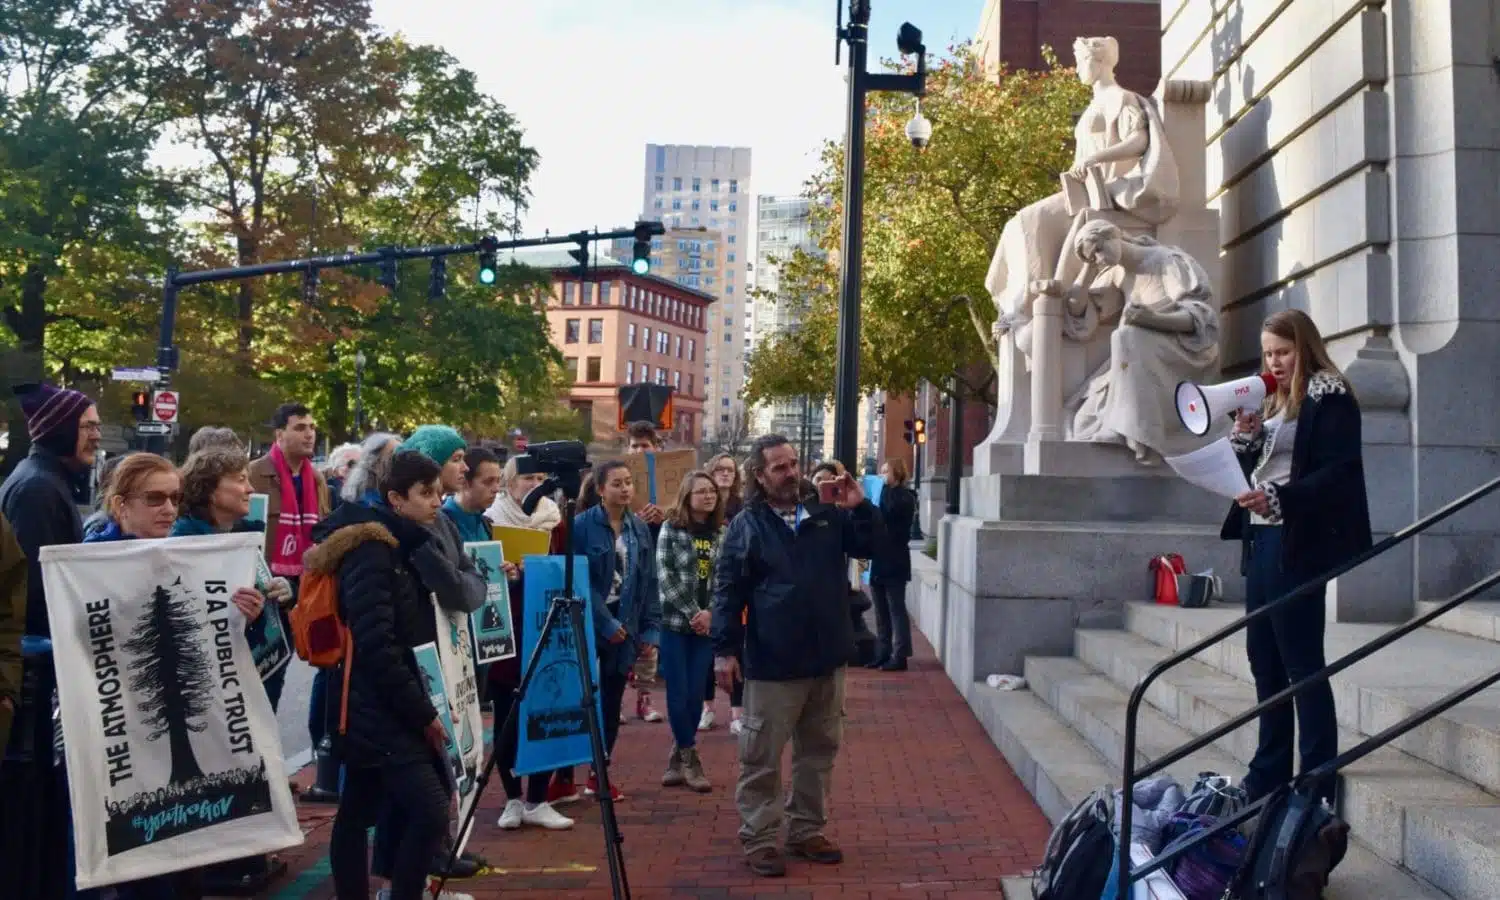 Rhode Island Rally for the #TrialoftheCentury calls on the government to respond meaningfully to the danger of climate change